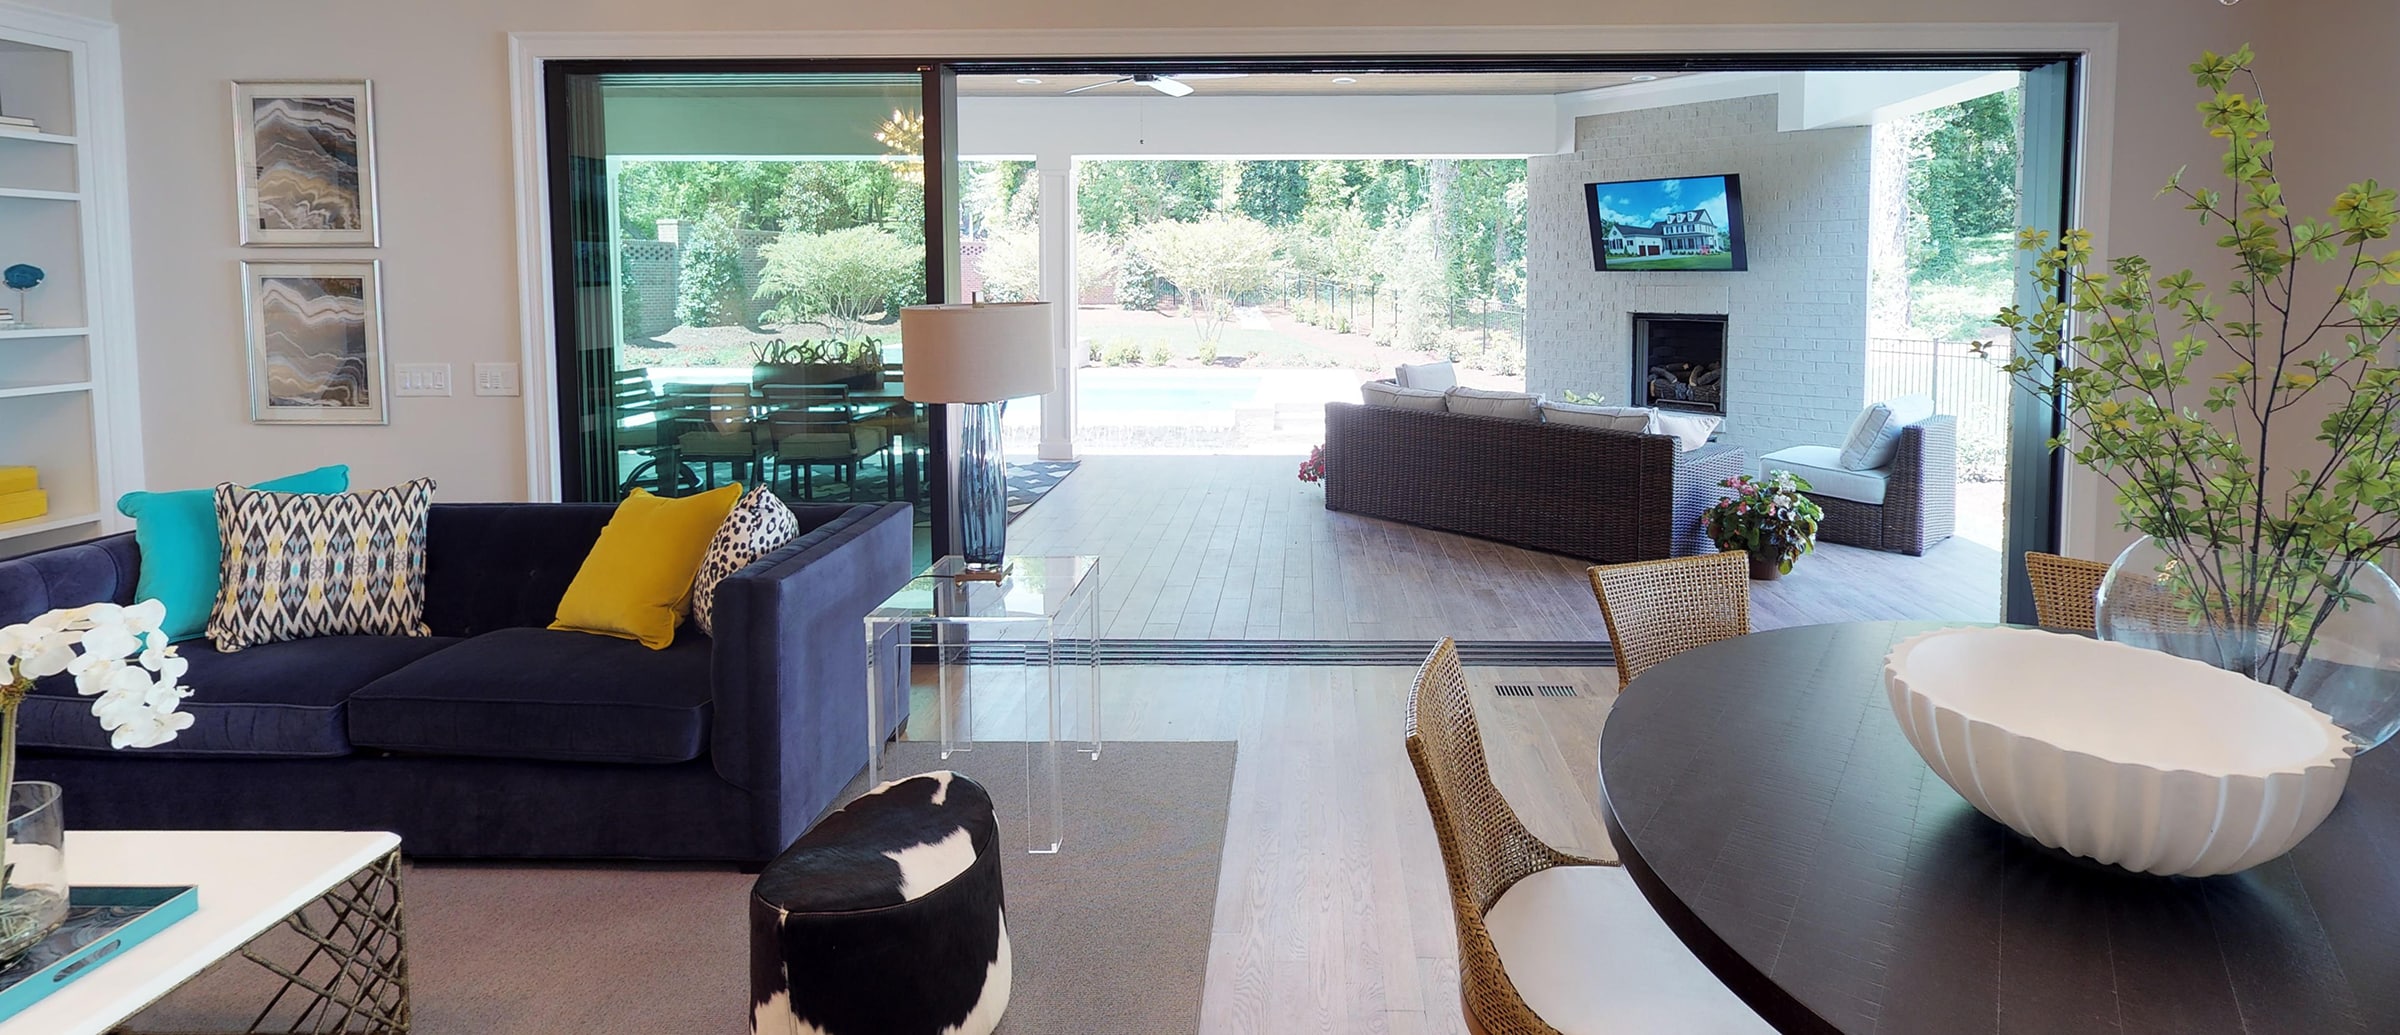 An open multi-slide glass door in the living room allows for a smooth transition to a backyard seating area.